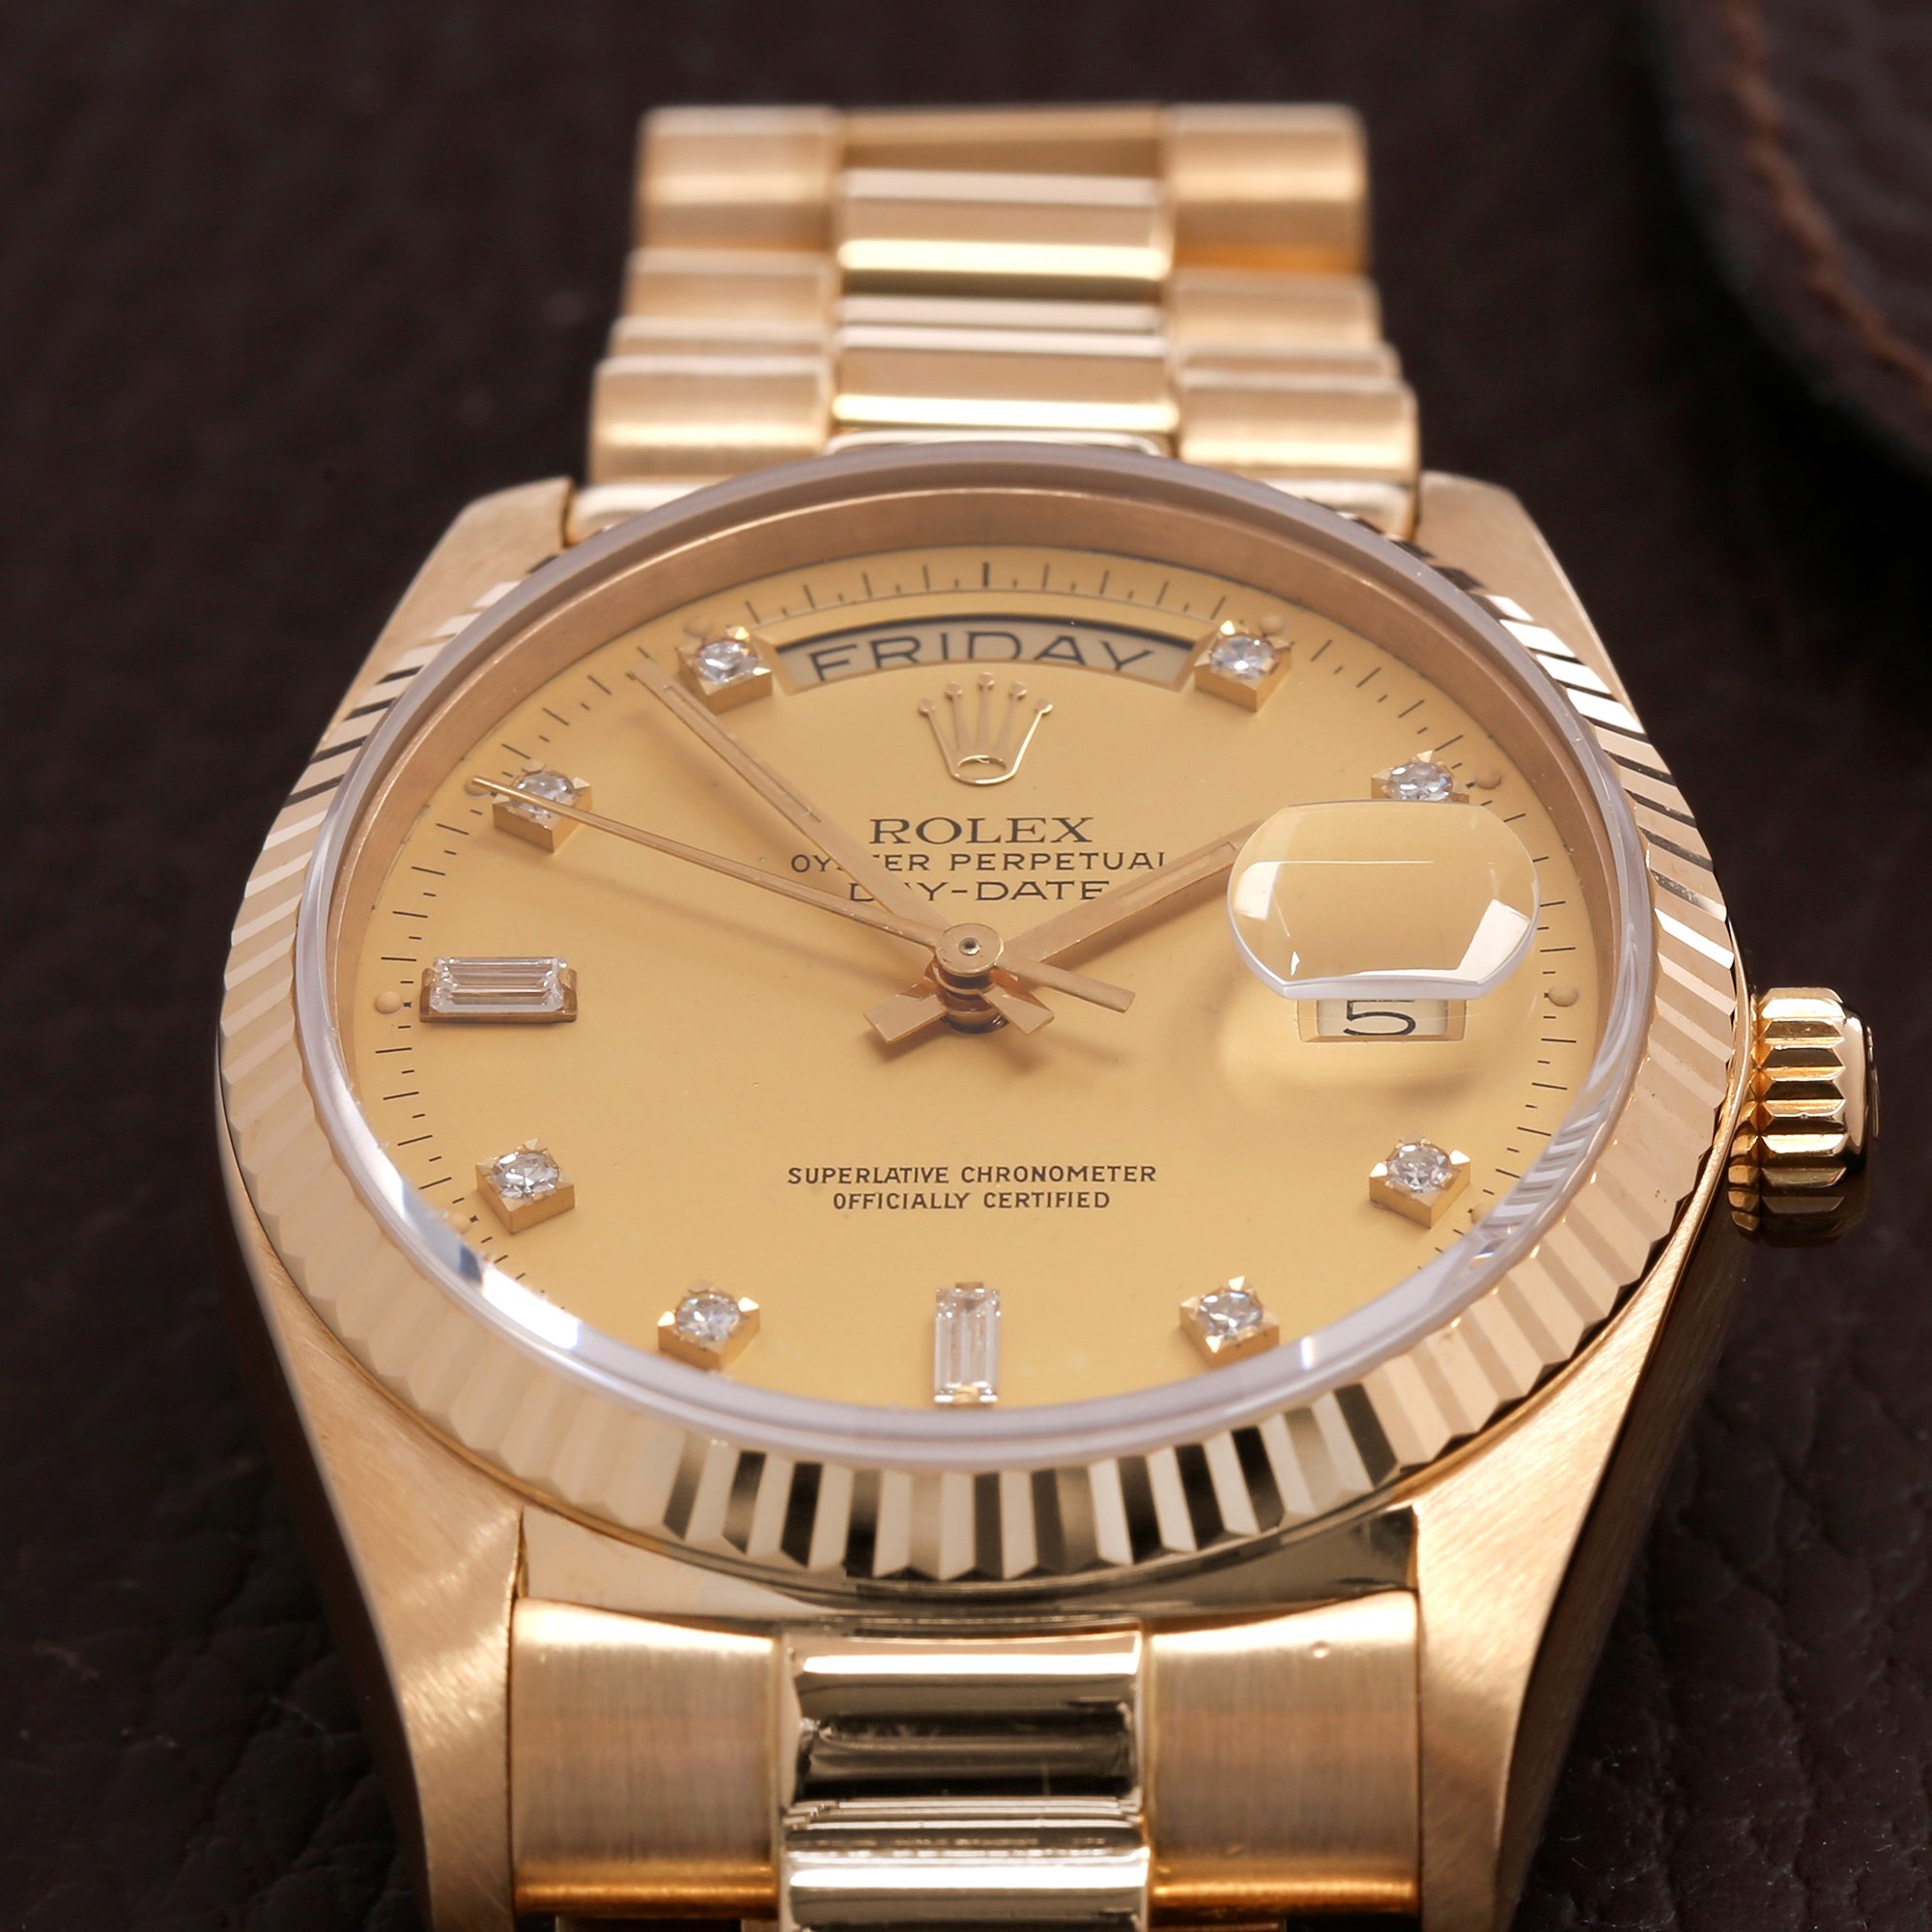 Rolex Day-Date 36 18038A Unisex Yellow Gold Diamond Dial Watch - Image 5 of 10